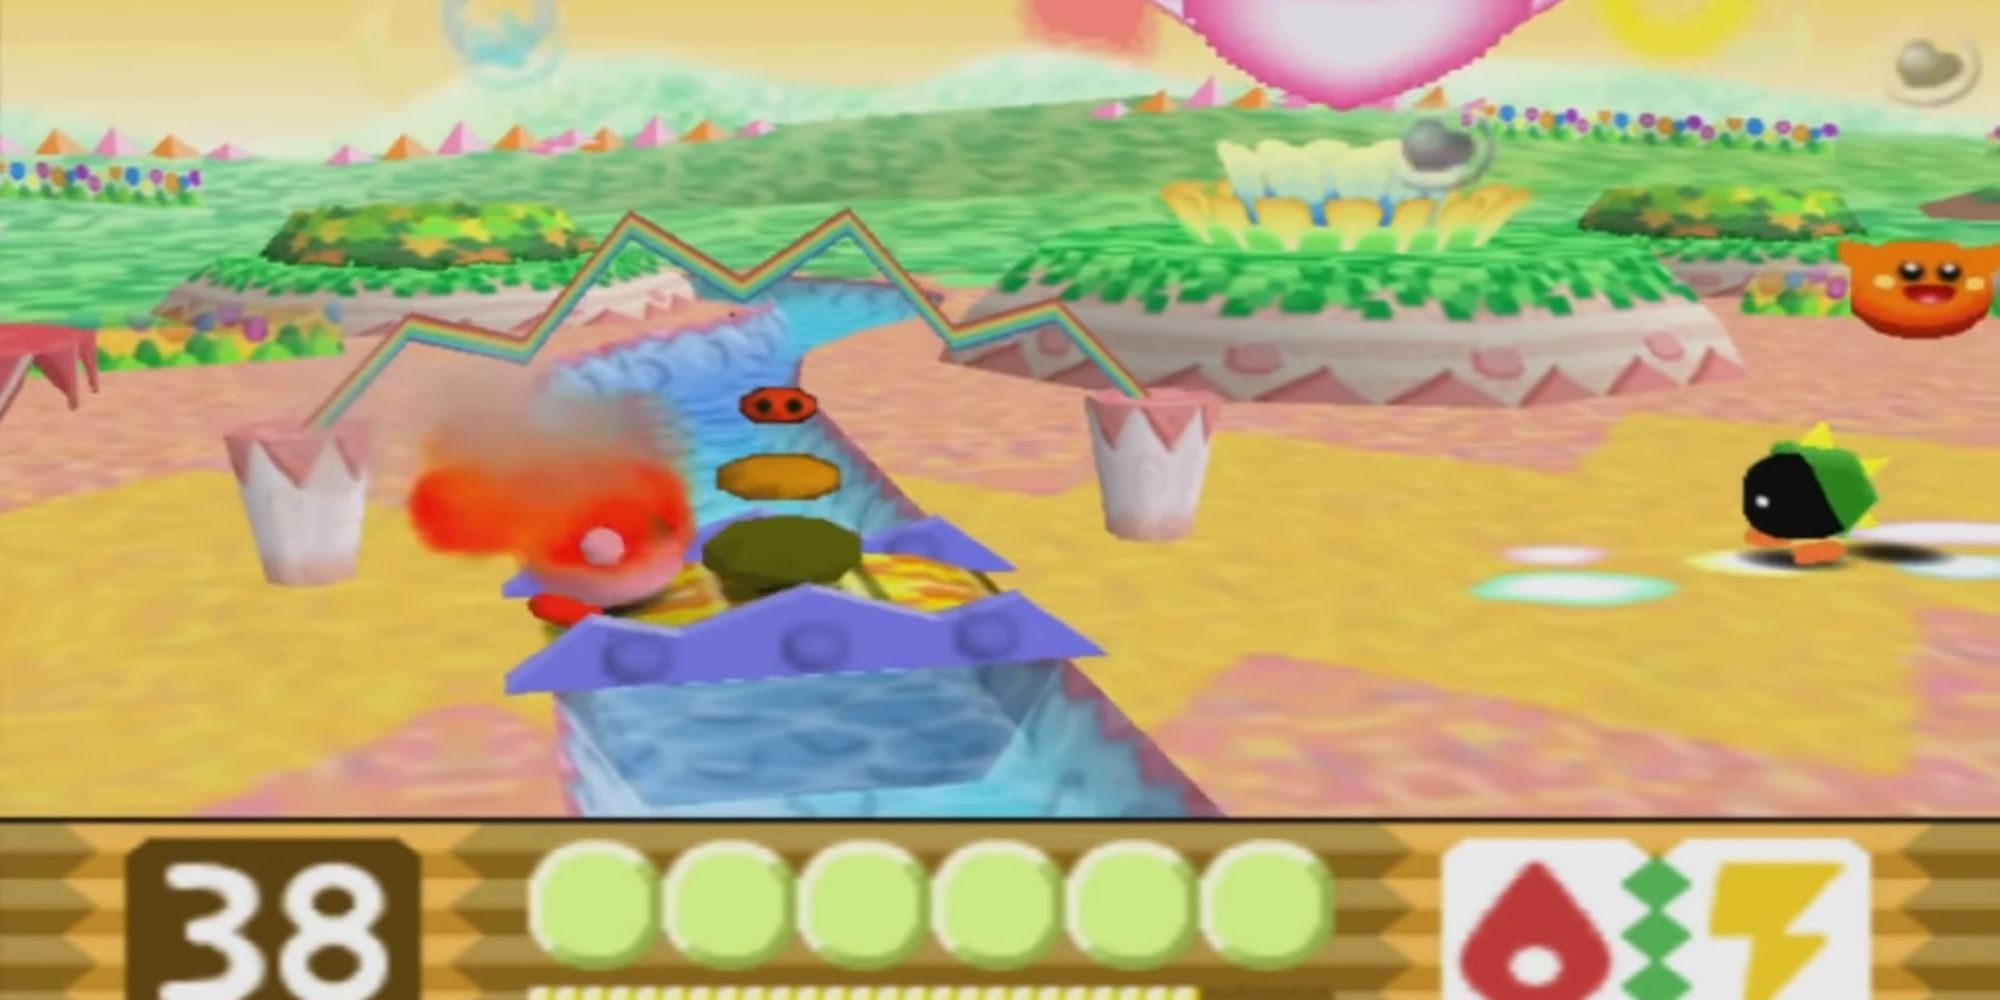 Kirby uses Fire Starter on Cairn on Ripple Star